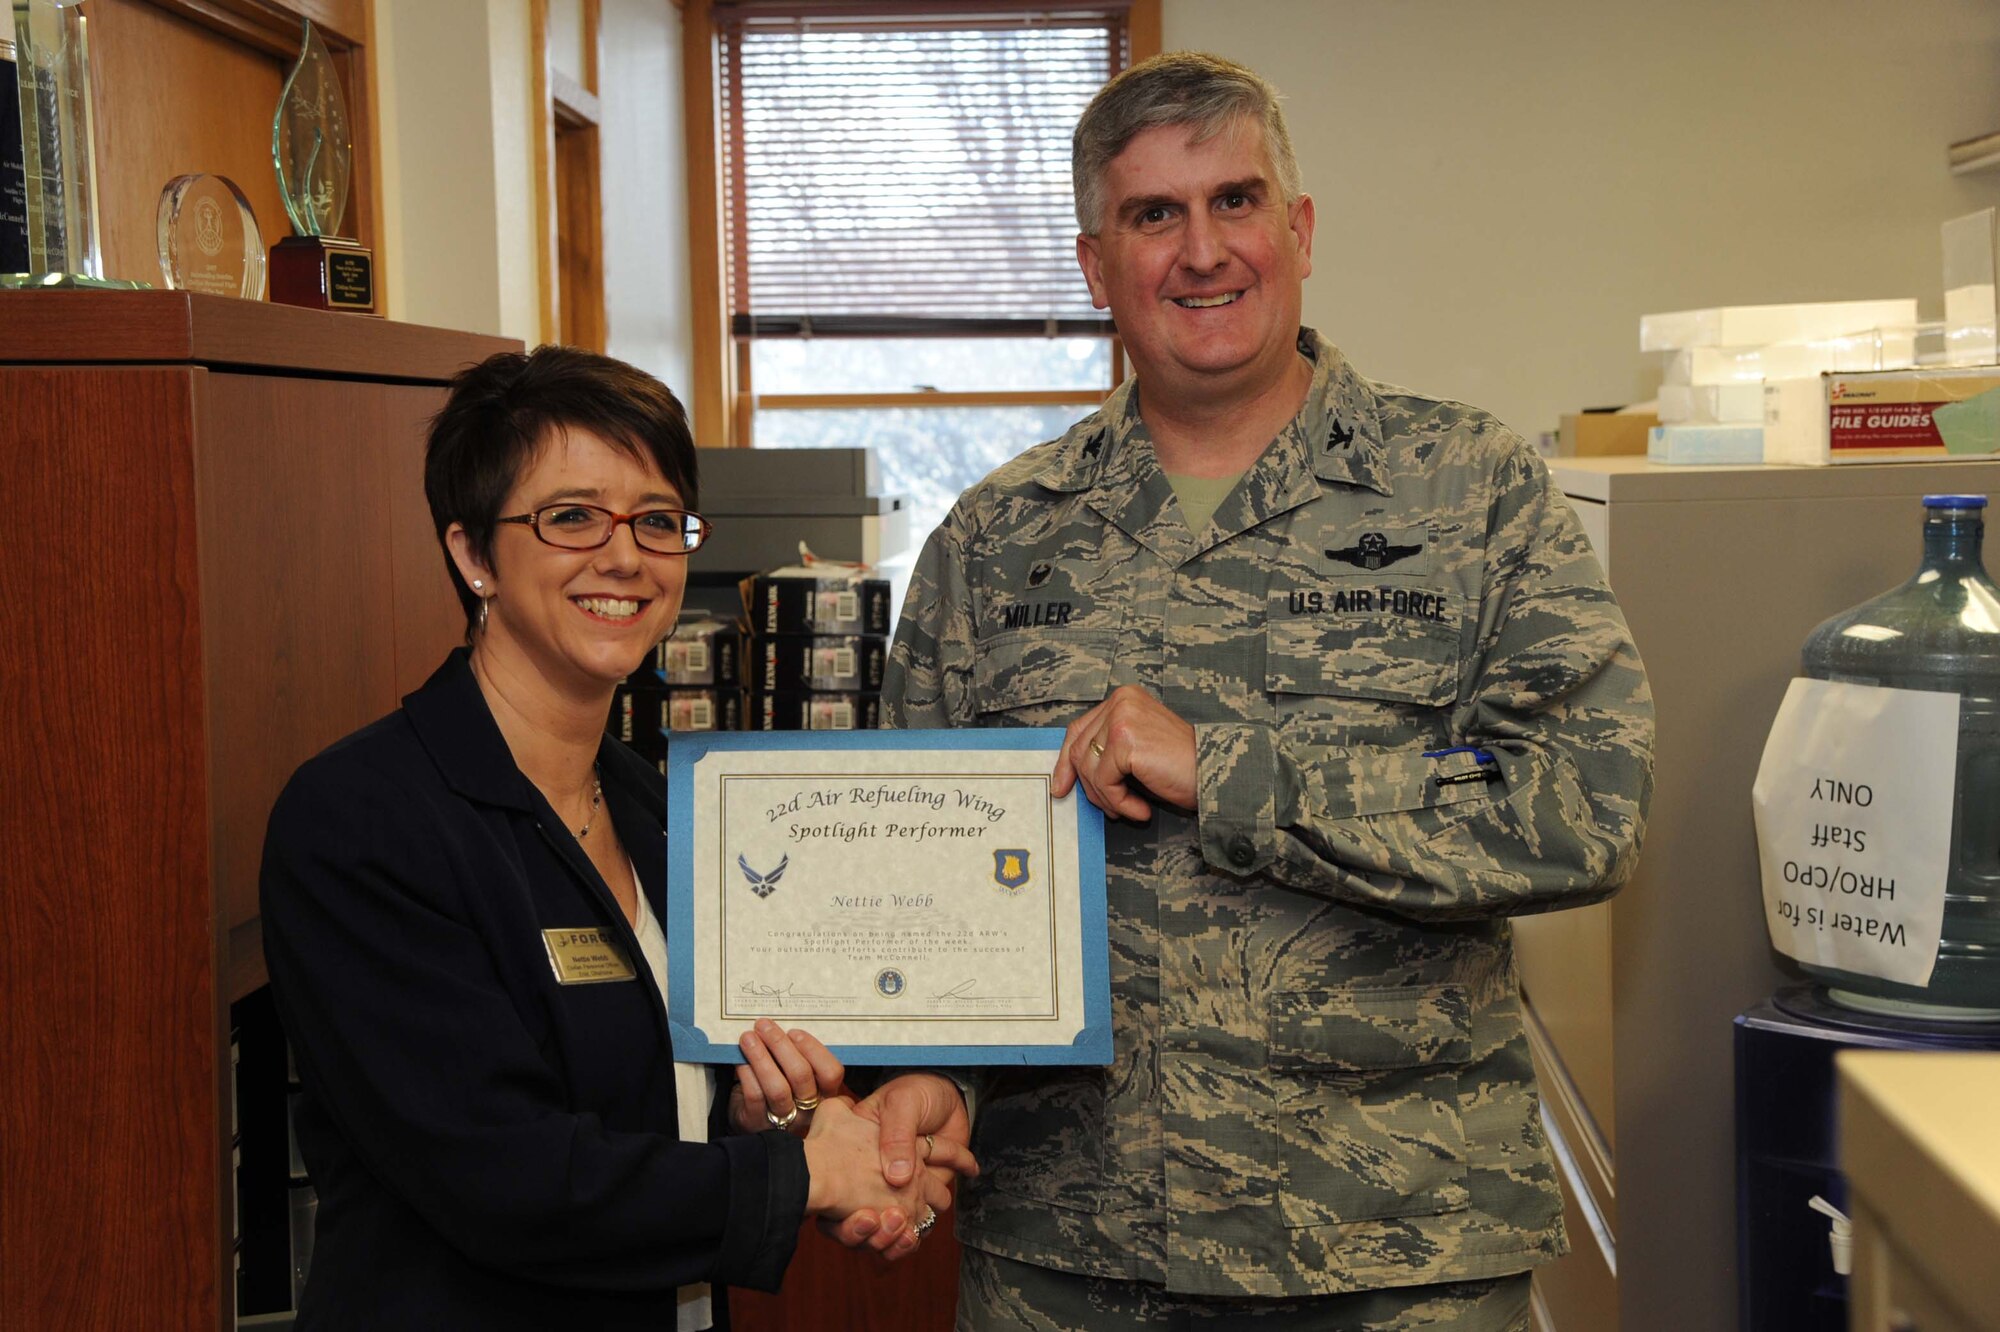 Nettie Webb, 22nd Force Support Squadron civilian personnel officer, poses with Col. Albert Miller, 22nd Air Refueling Wing commander, March 9, 2017, at McConnell Air Force Base, Kan. Webb received the spotlight performer for the week of Jan. 30 – Feb. 3. (U.S. Air Force photo/Airman 1st Class Jenna K. Caldwell)  